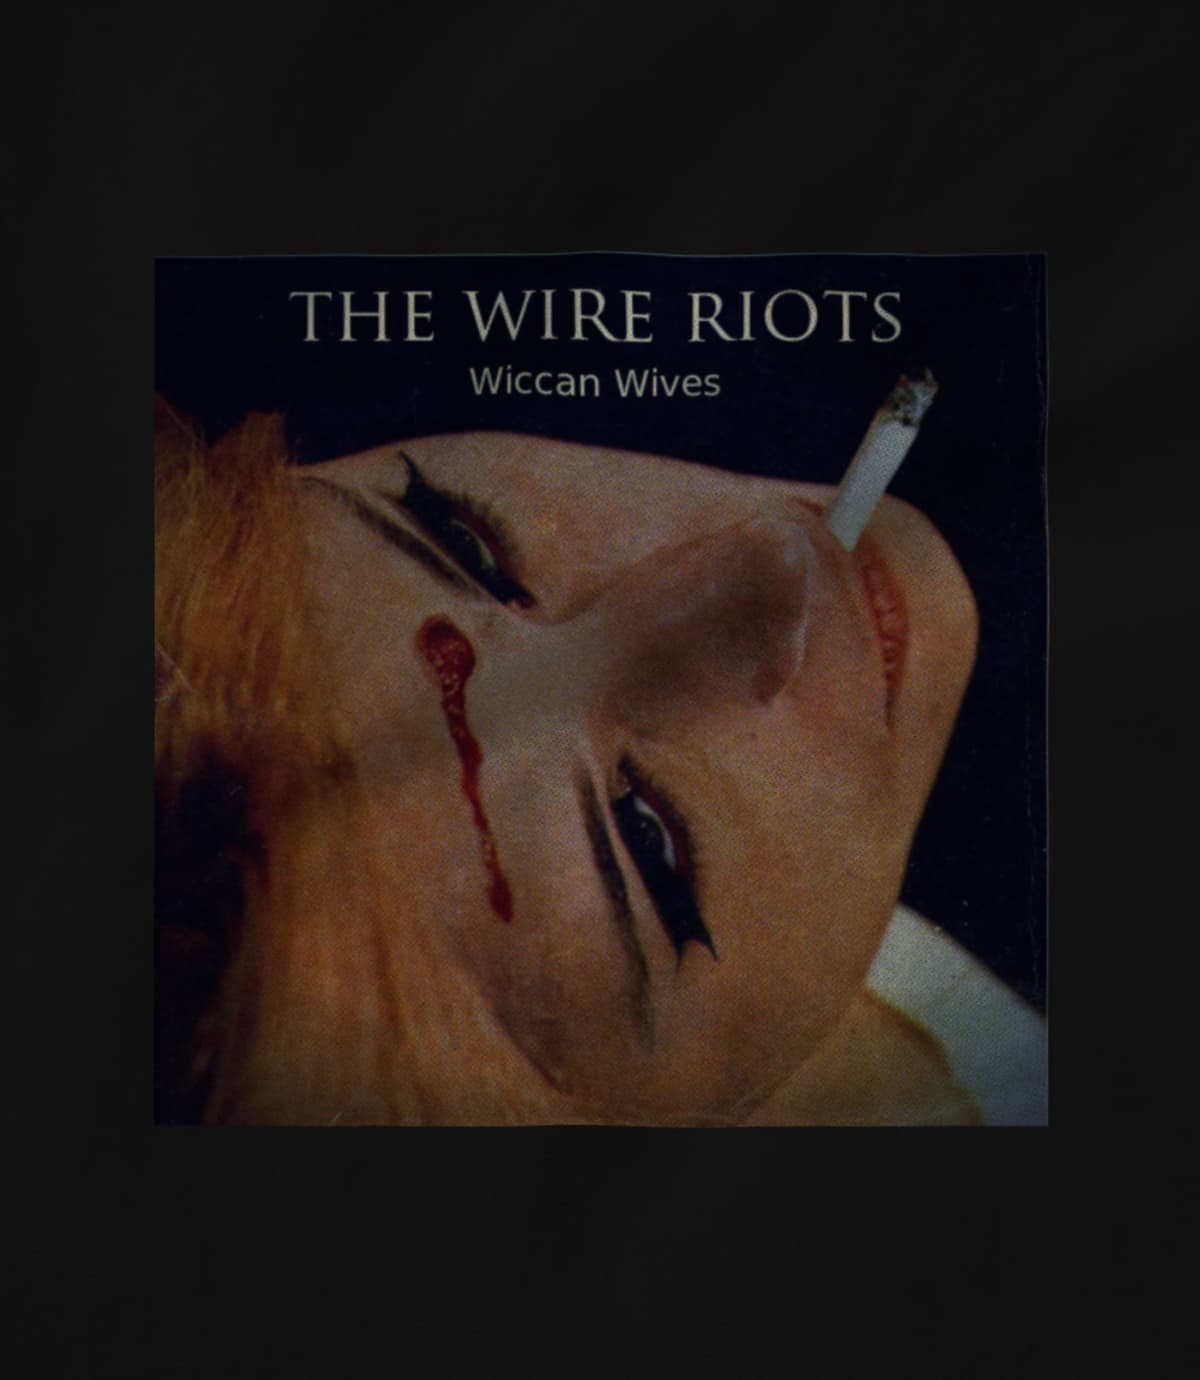 The wire riots  wiccan wives 1571698574